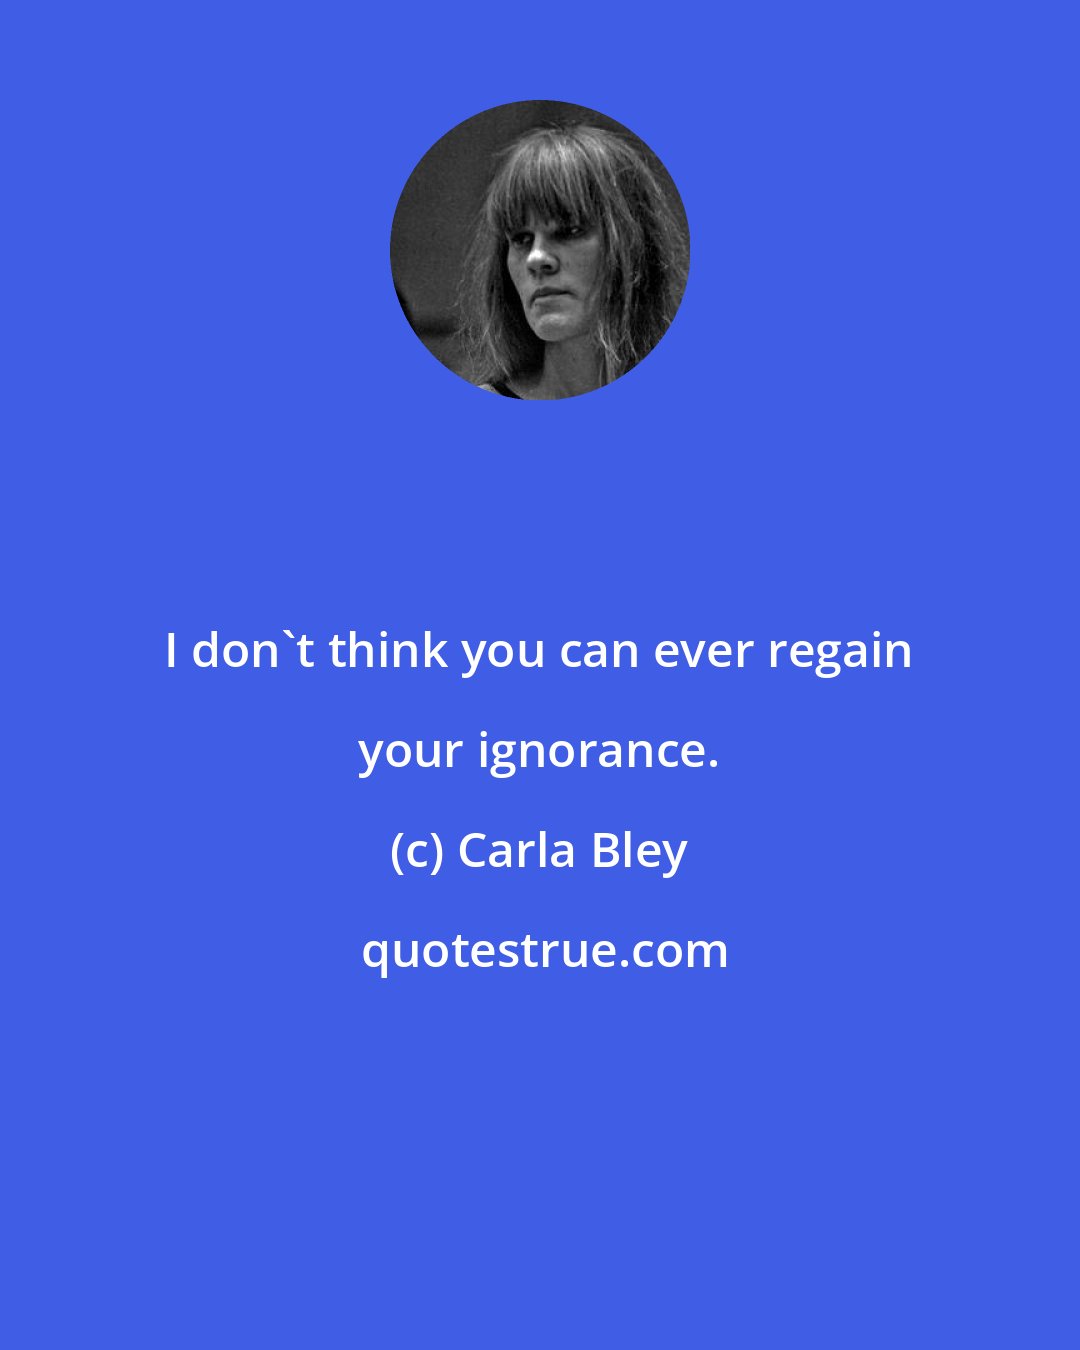 Carla Bley: I don't think you can ever regain your ignorance.